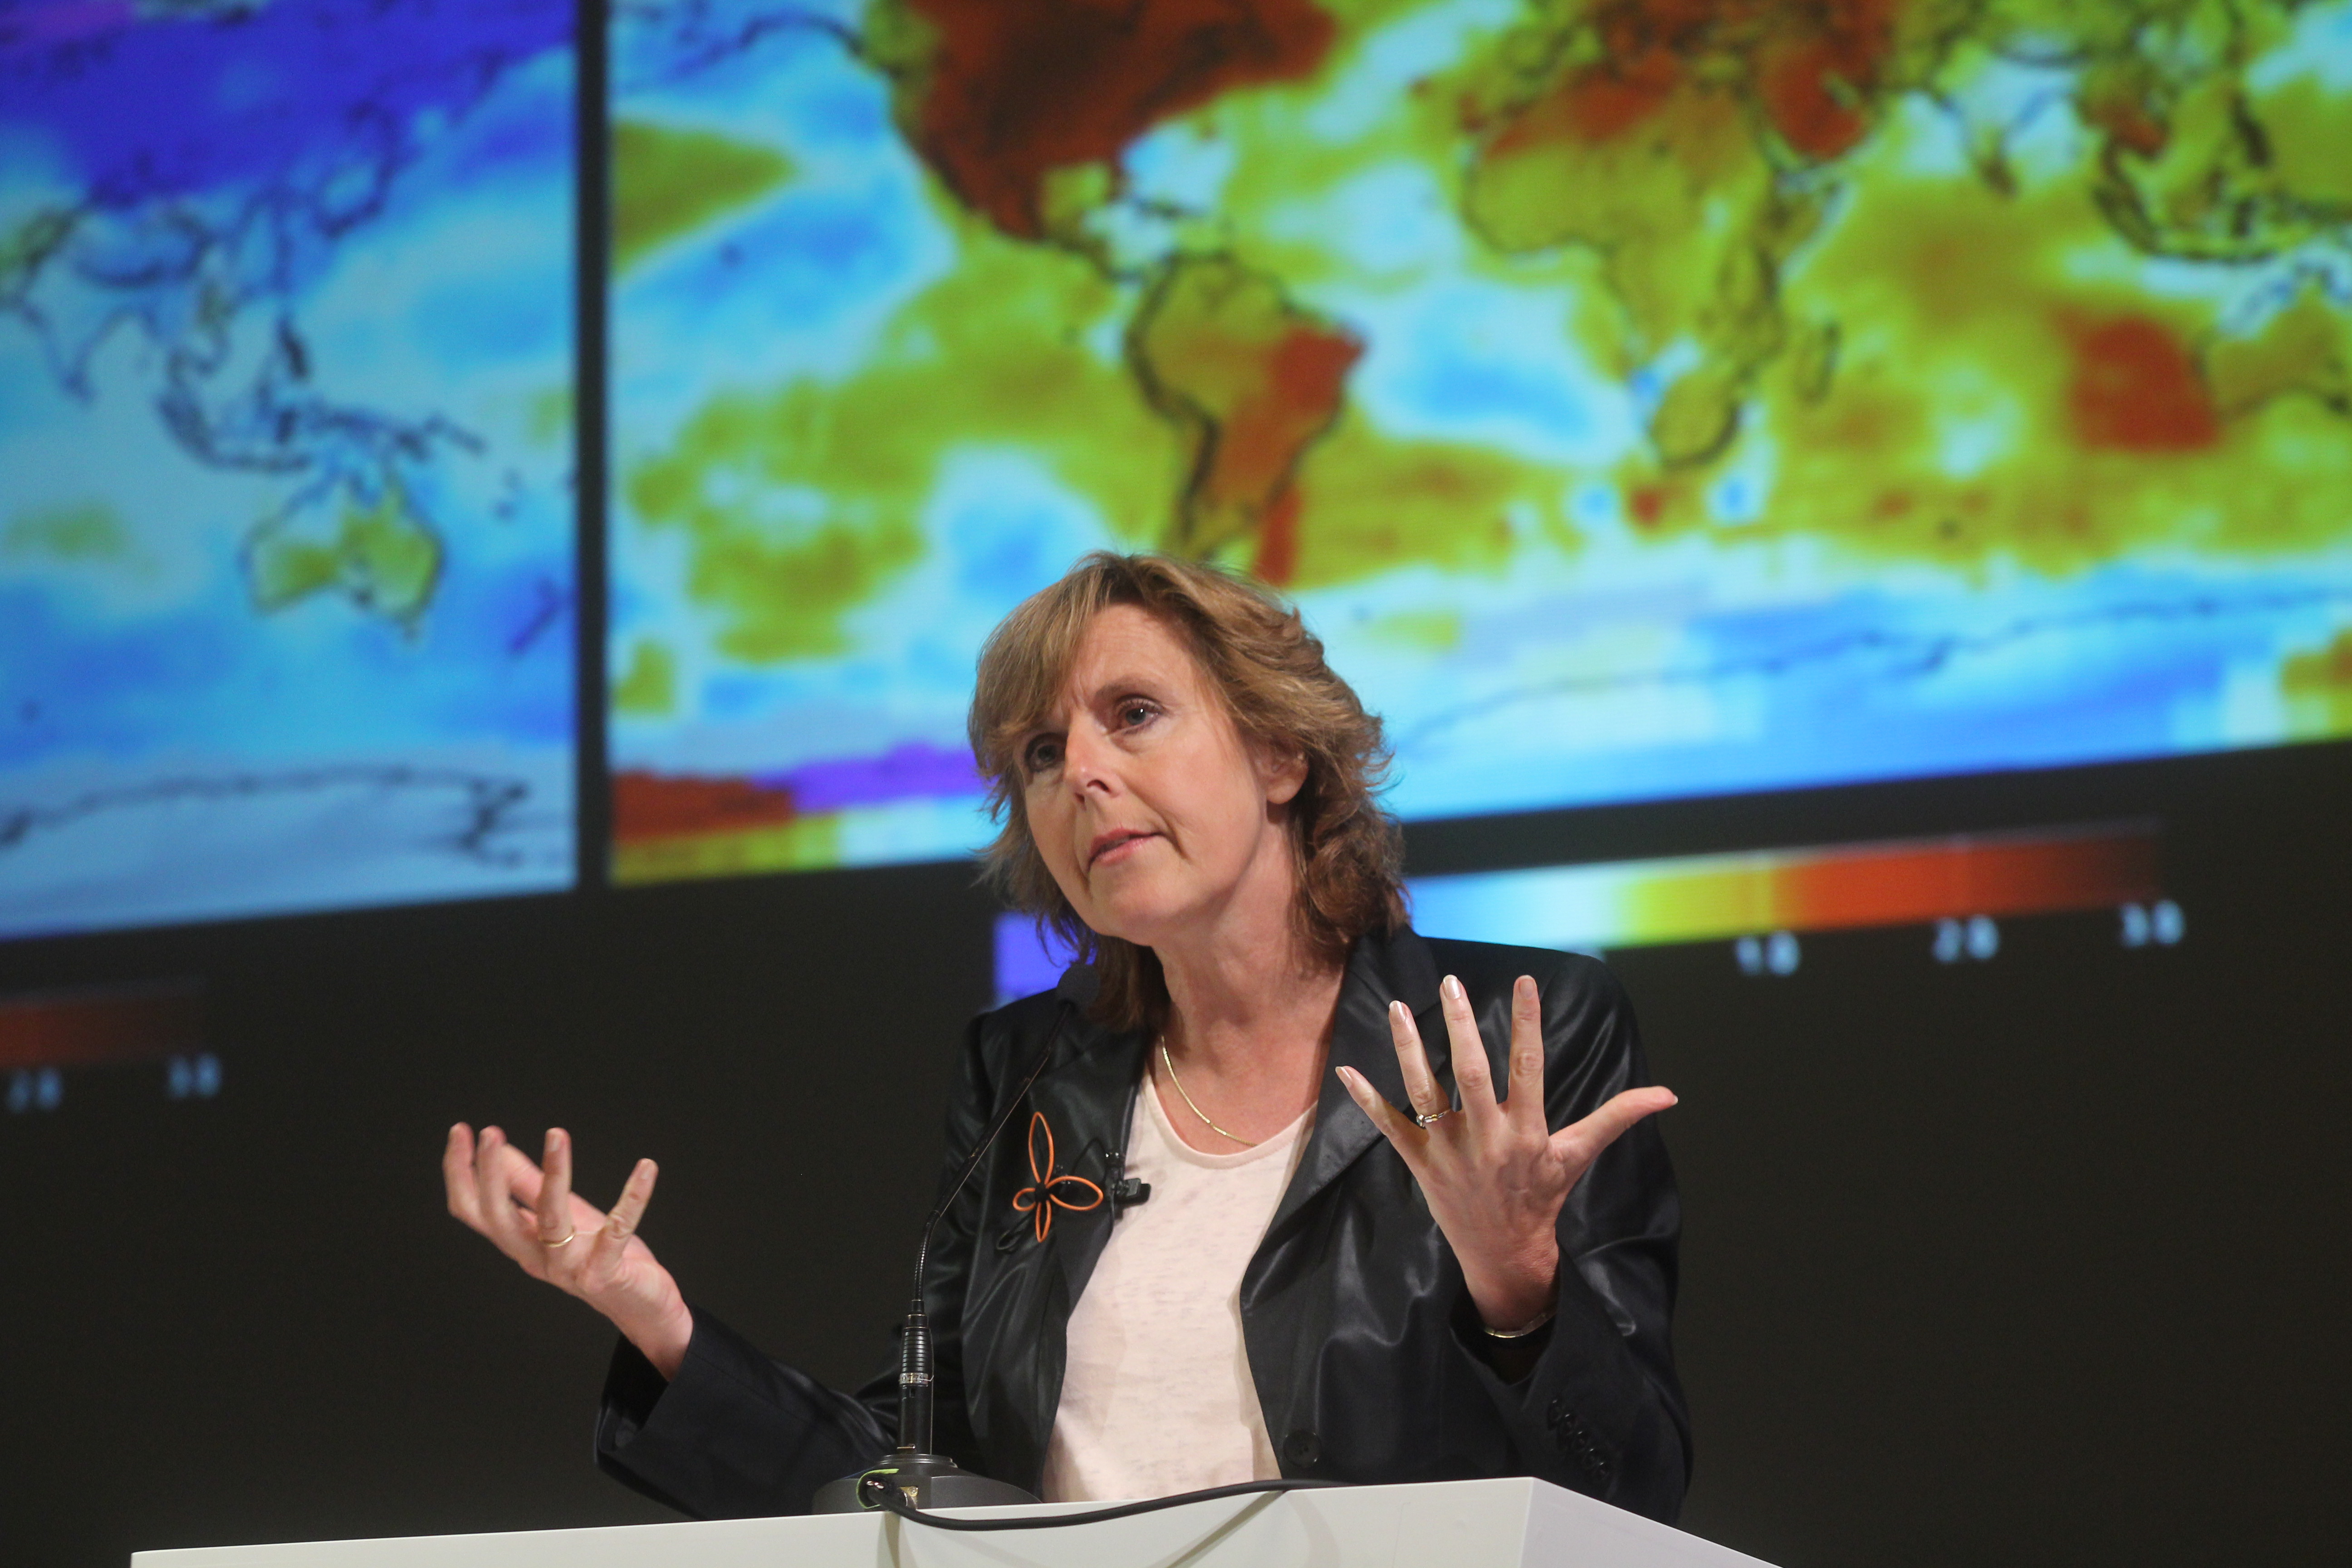 Connie hedegaard_